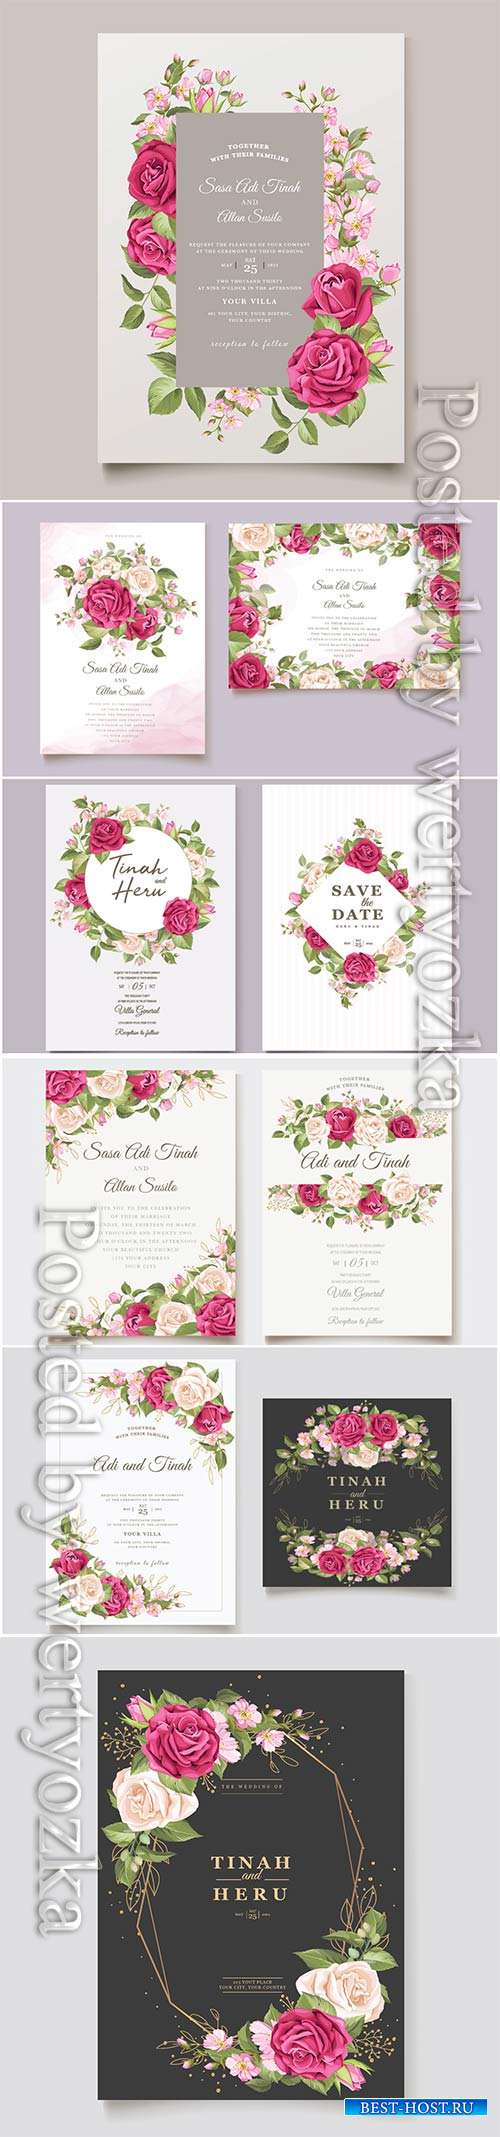 Wedding invitation cards with flowers in vector